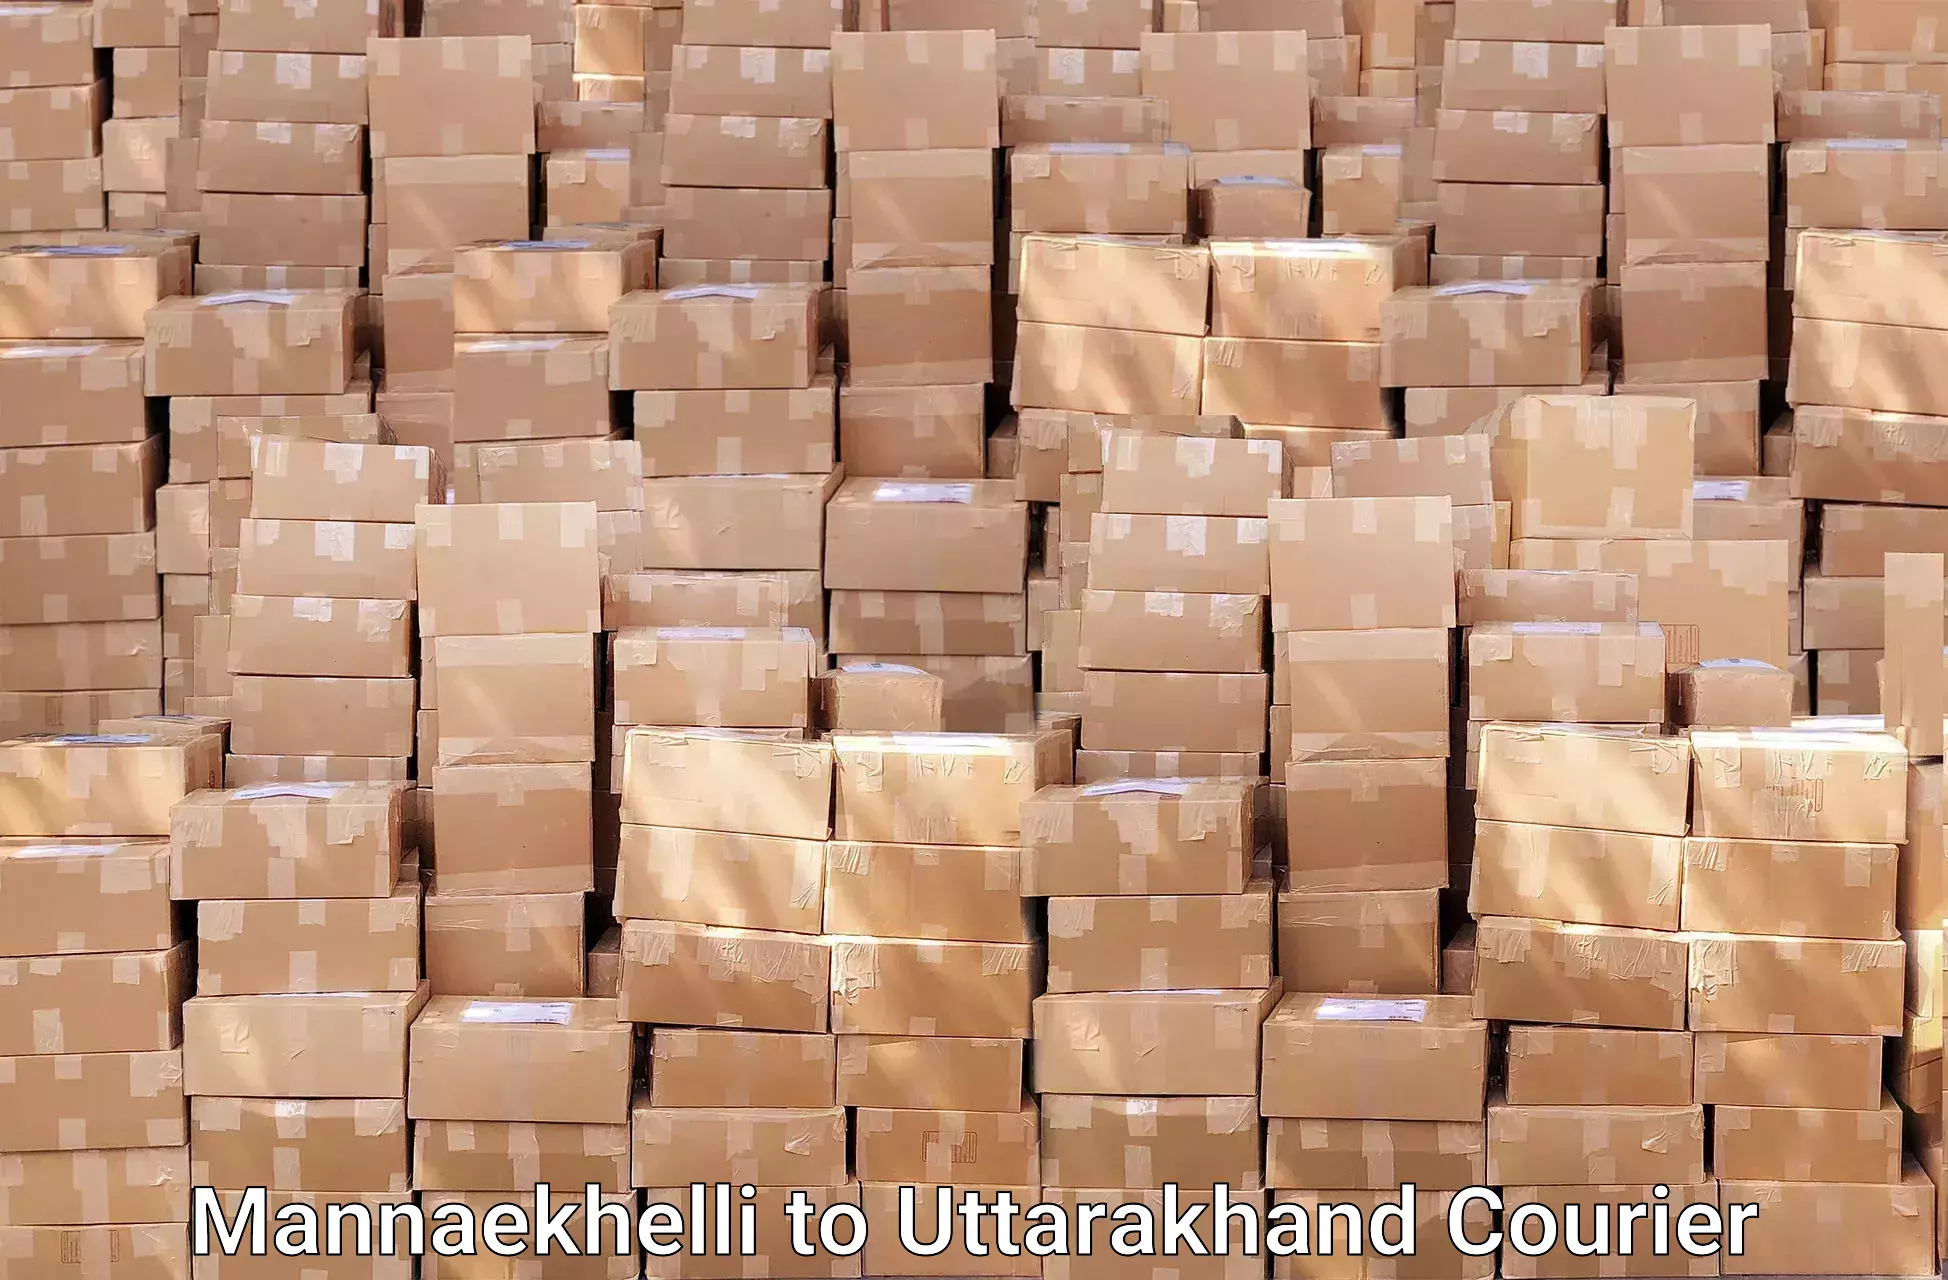 Professional movers and packers in Mannaekhelli to Ramnagar